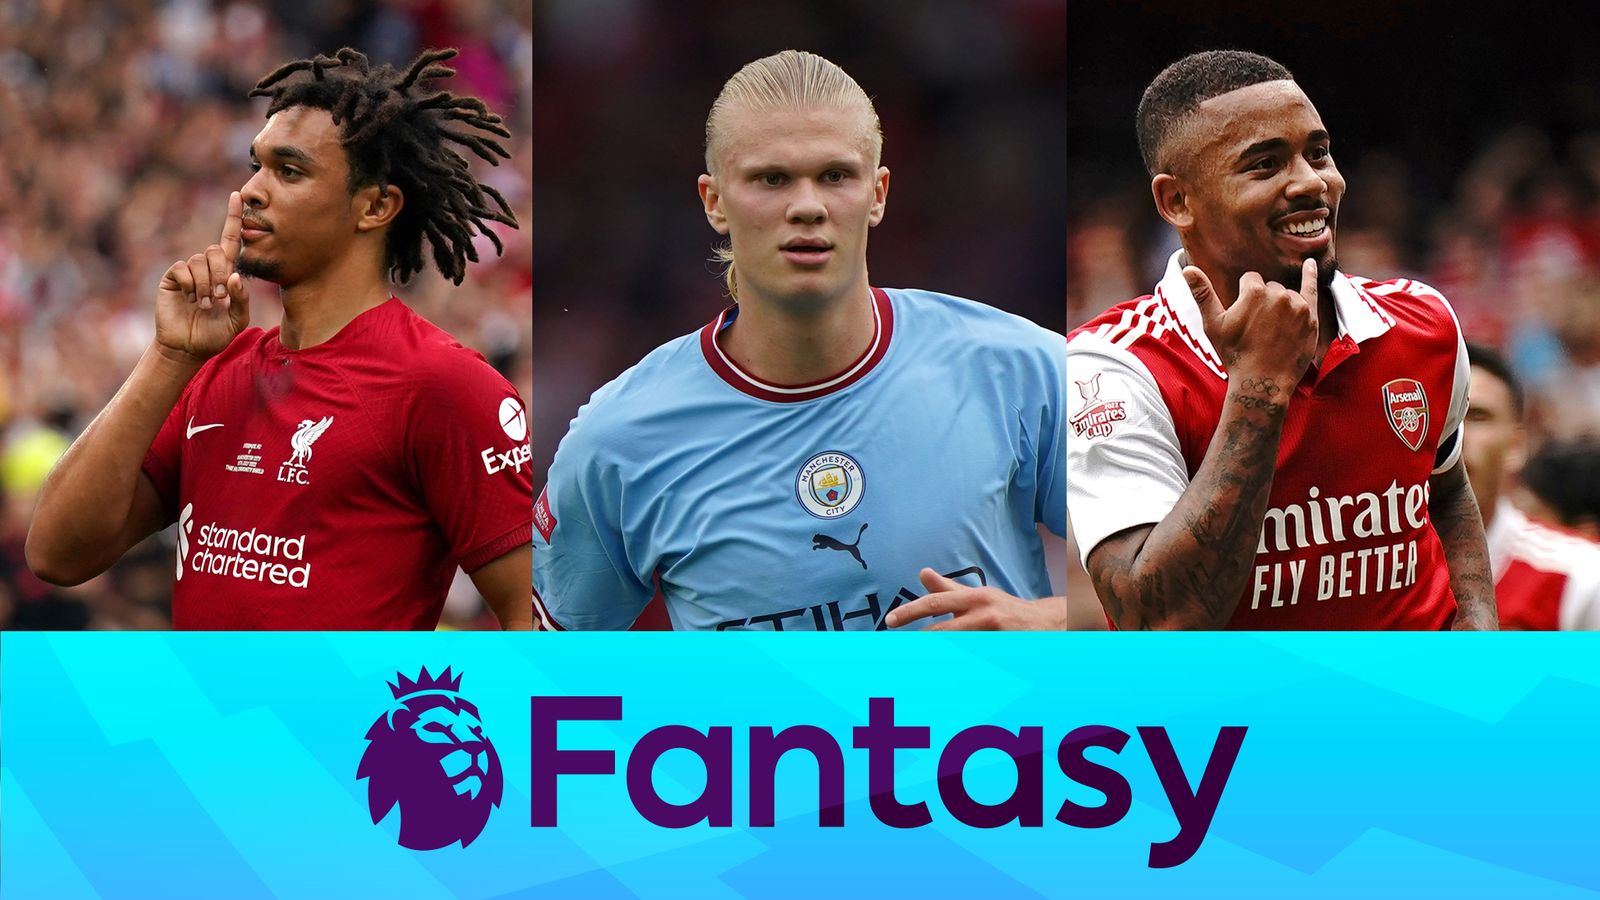 Fantasy Premier League 22/23: Gameweek 2 tips and advice from experts